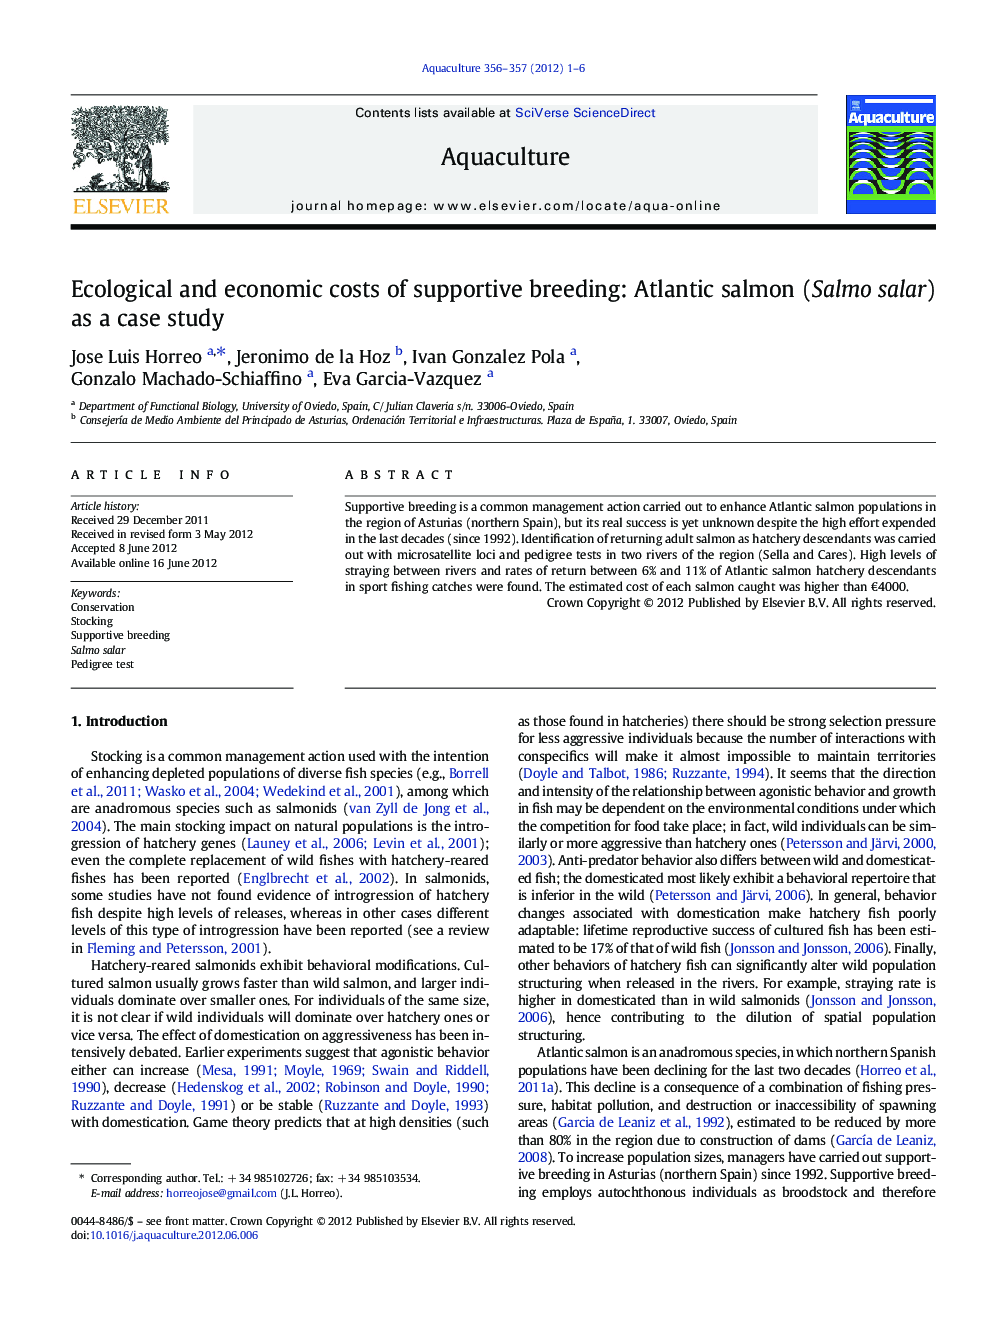 Ecological and economic costs of supportive breeding: Atlantic salmon (Salmo salar) as a case study